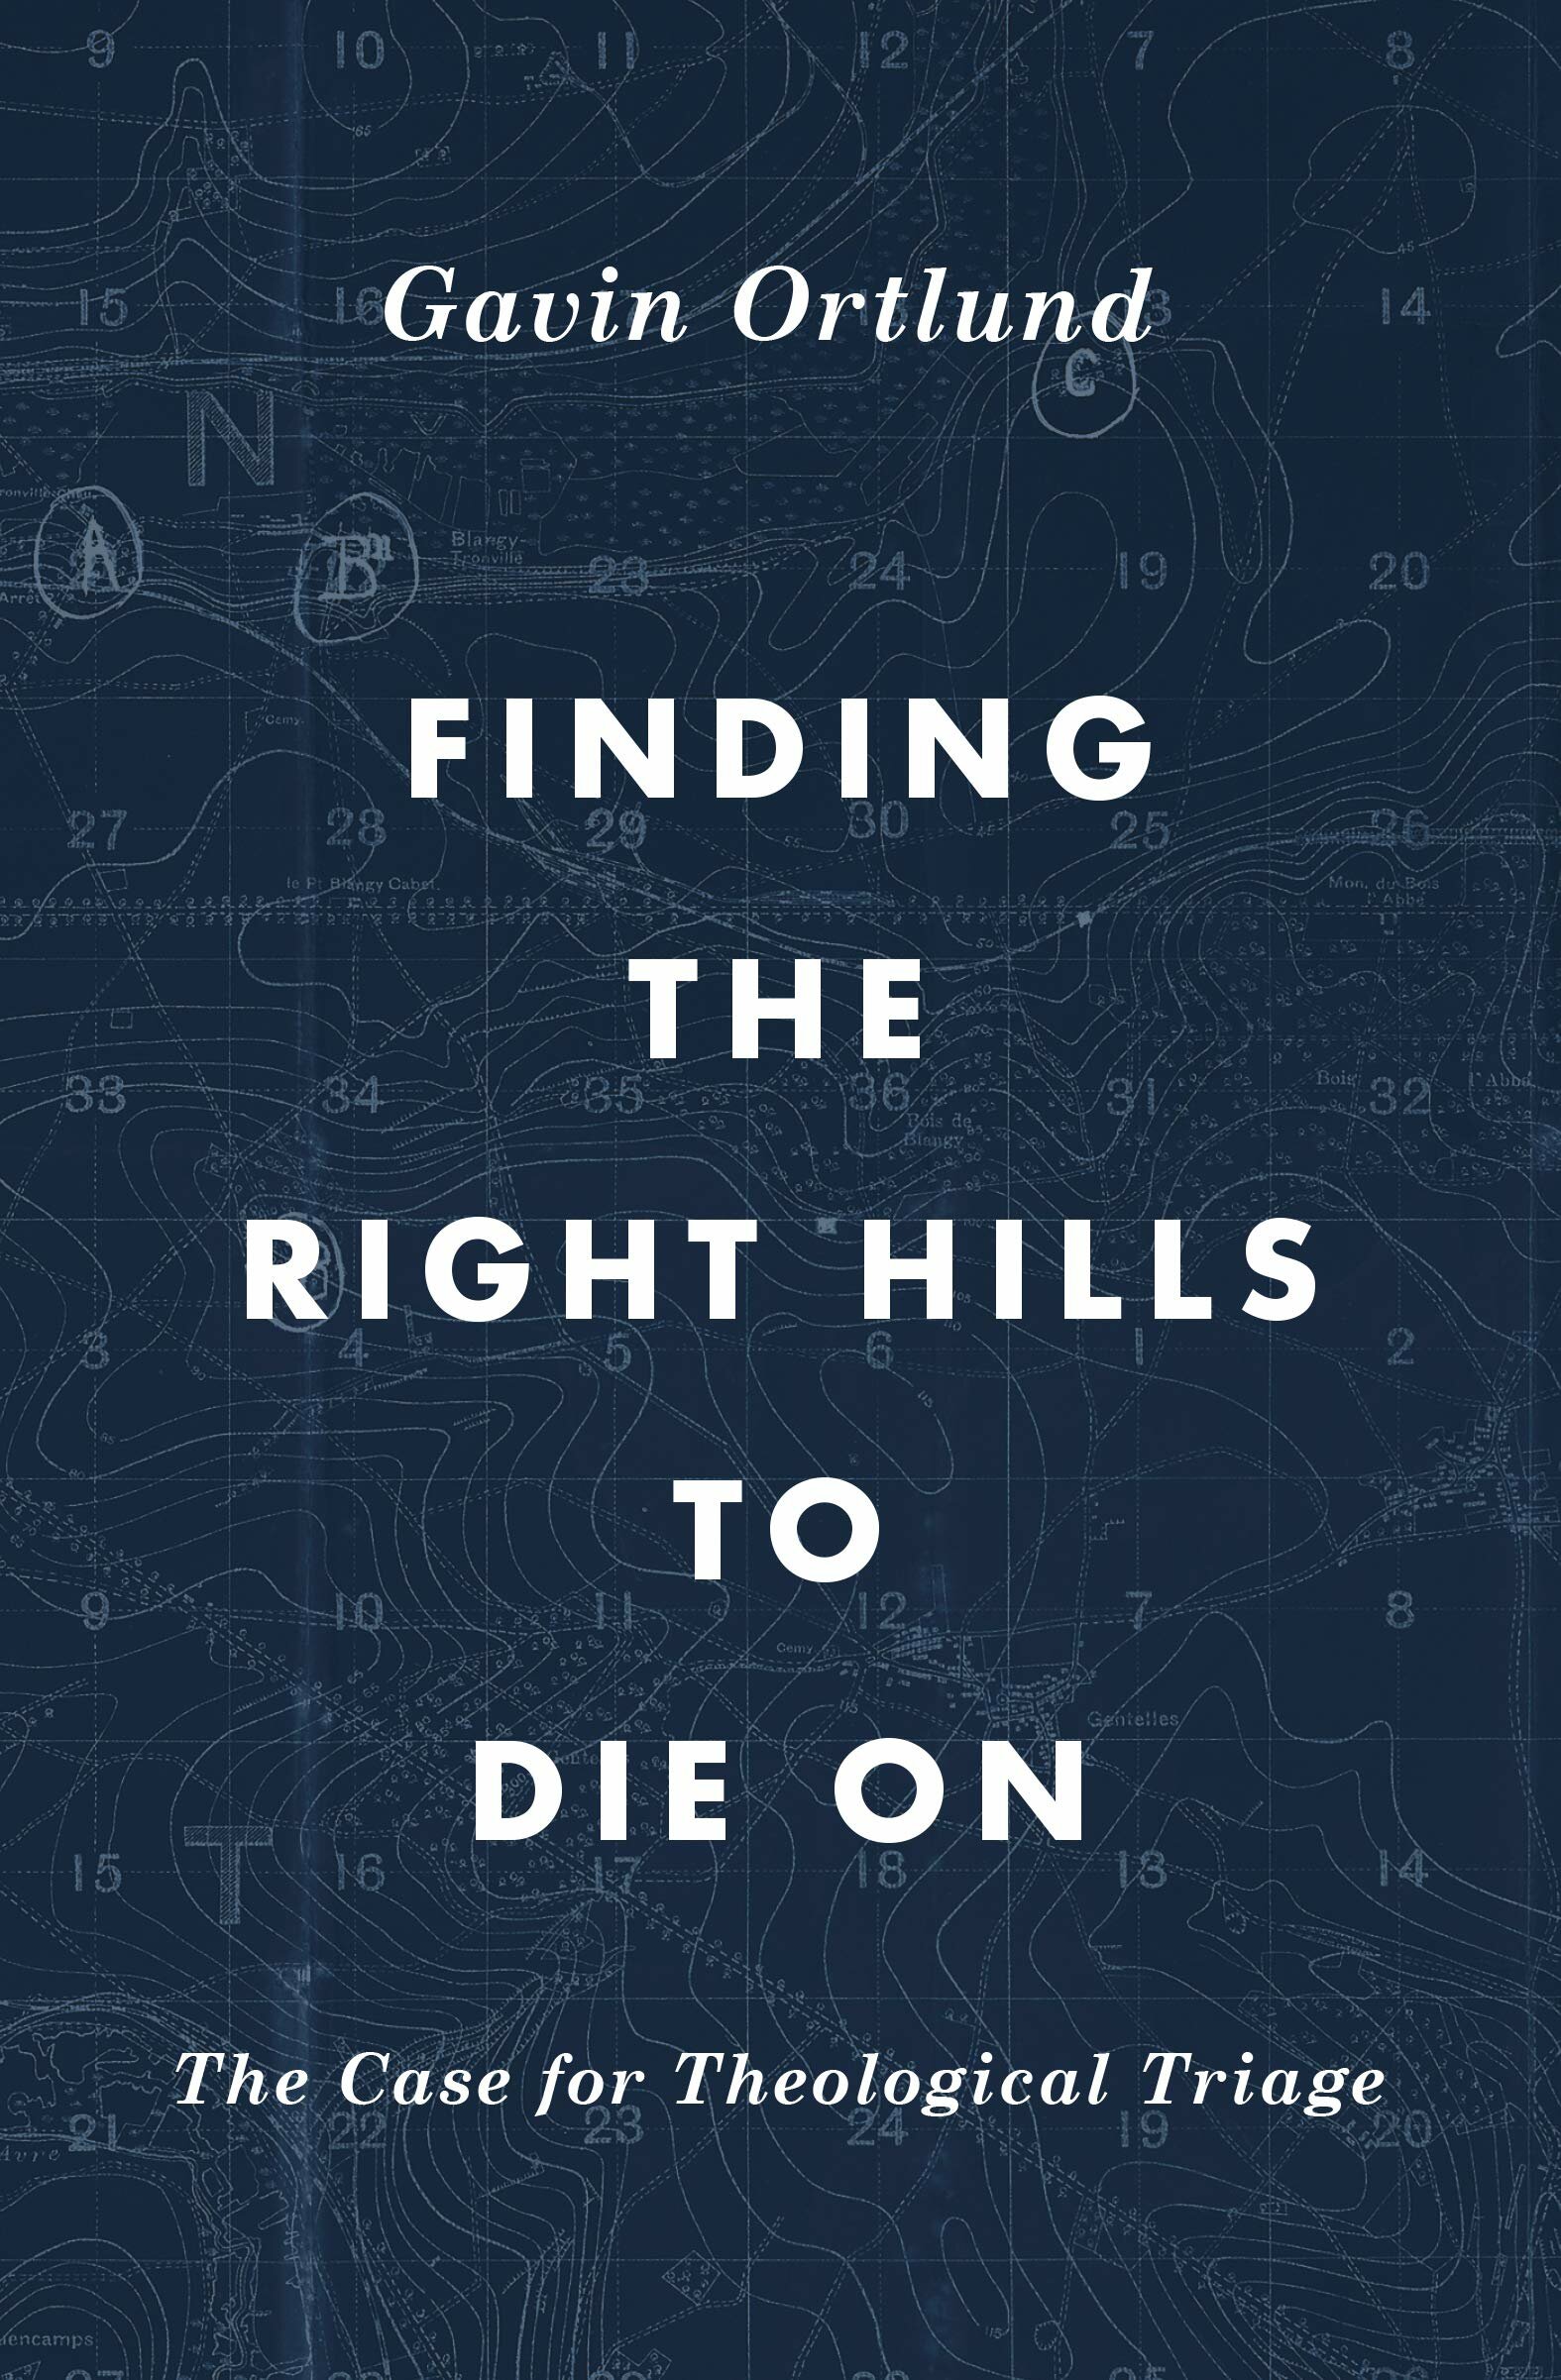 Finding the Right Hills to Die On: The Case for Theological Triage (The Gospel Coalition)